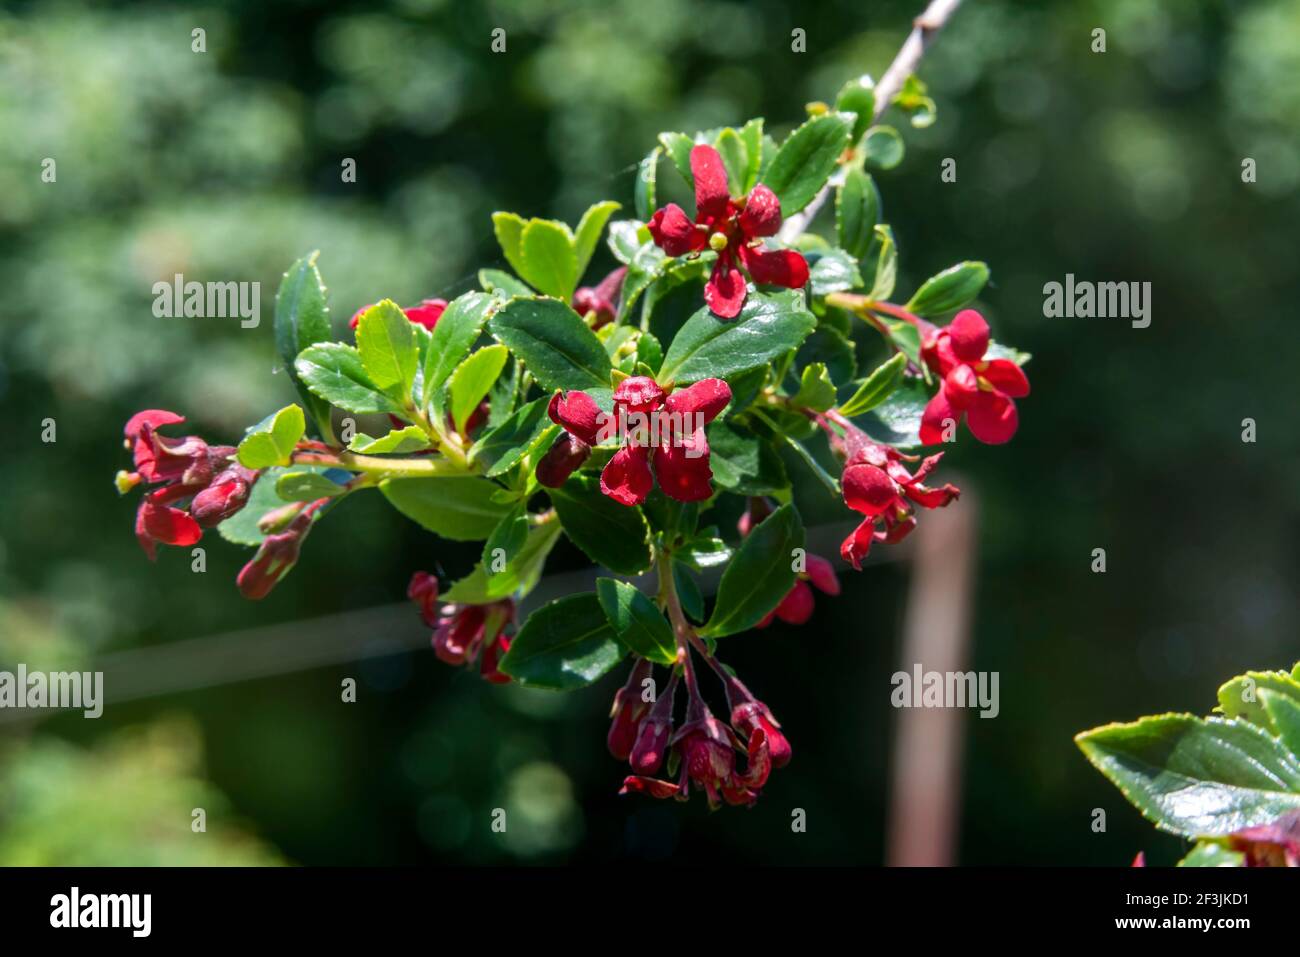 Escallonia 'Red Elf' a summer flowering evergreen shrub plant with a red springtime flower, stock photo image Stock Photo